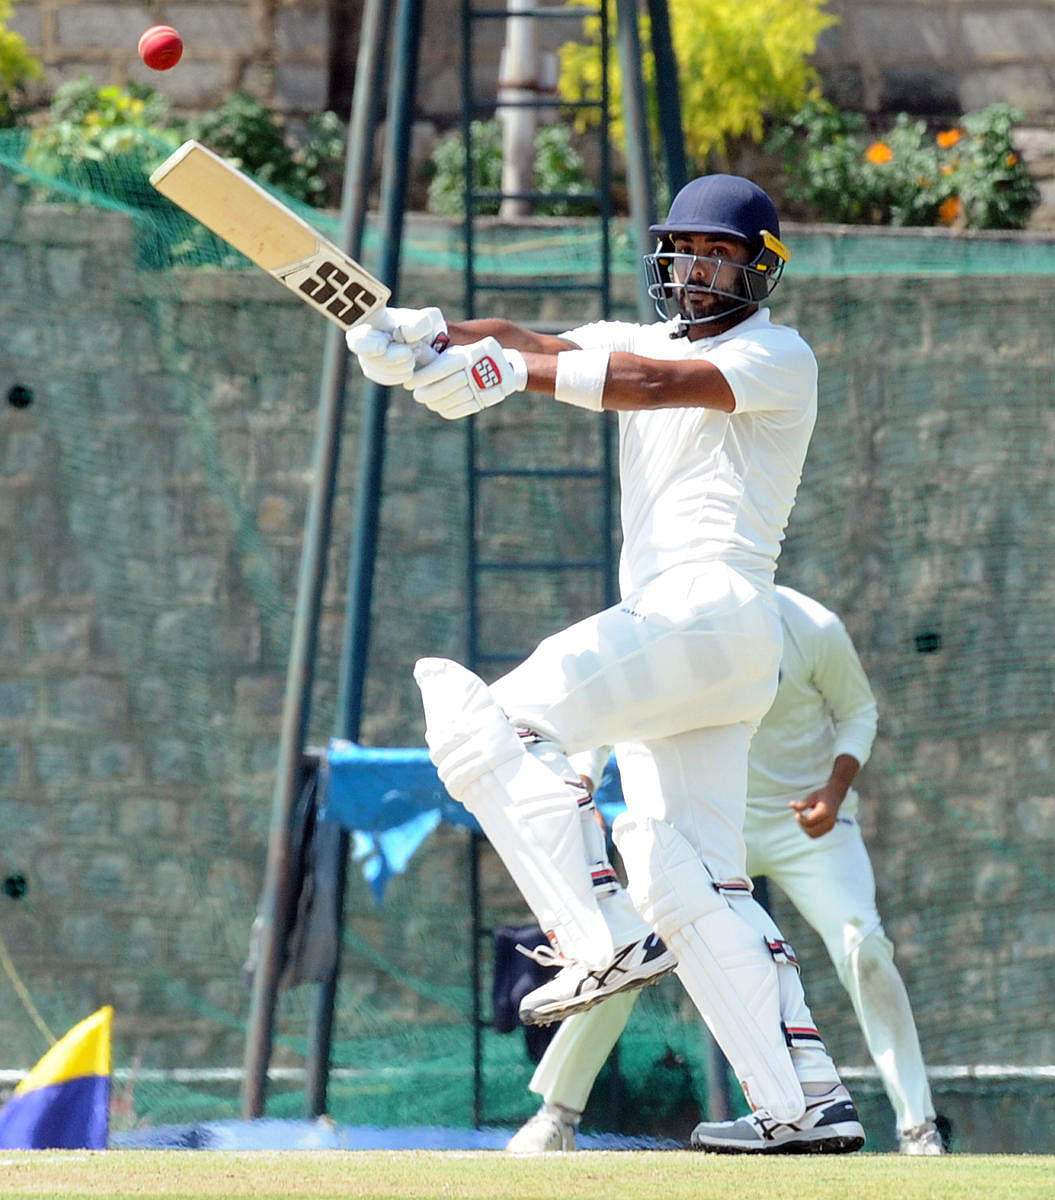 Karnataka's Stuart Binny pulls one to the fence en route his 118 against Delhi during their Ranji Trophy tie at Alur Ground in Bengaluru on Friday. DH Photo/ Srikanta Sharma R